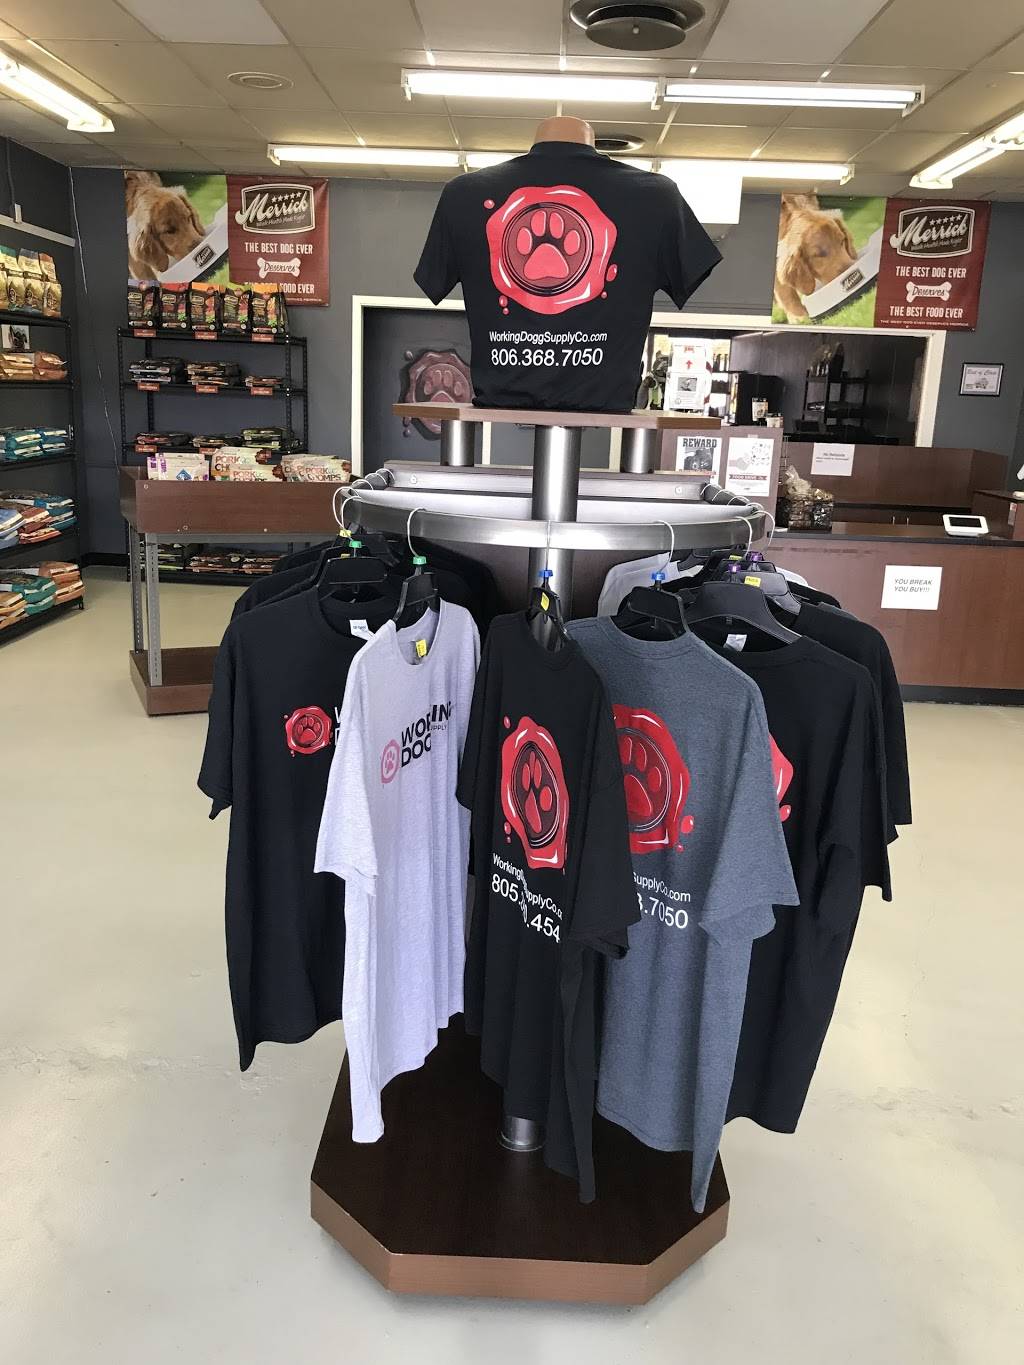 Working Dogg Supply Co. | 2149 50th St Suite A, Lubbock, TX 79412, USA | Phone: (806) 368-7050